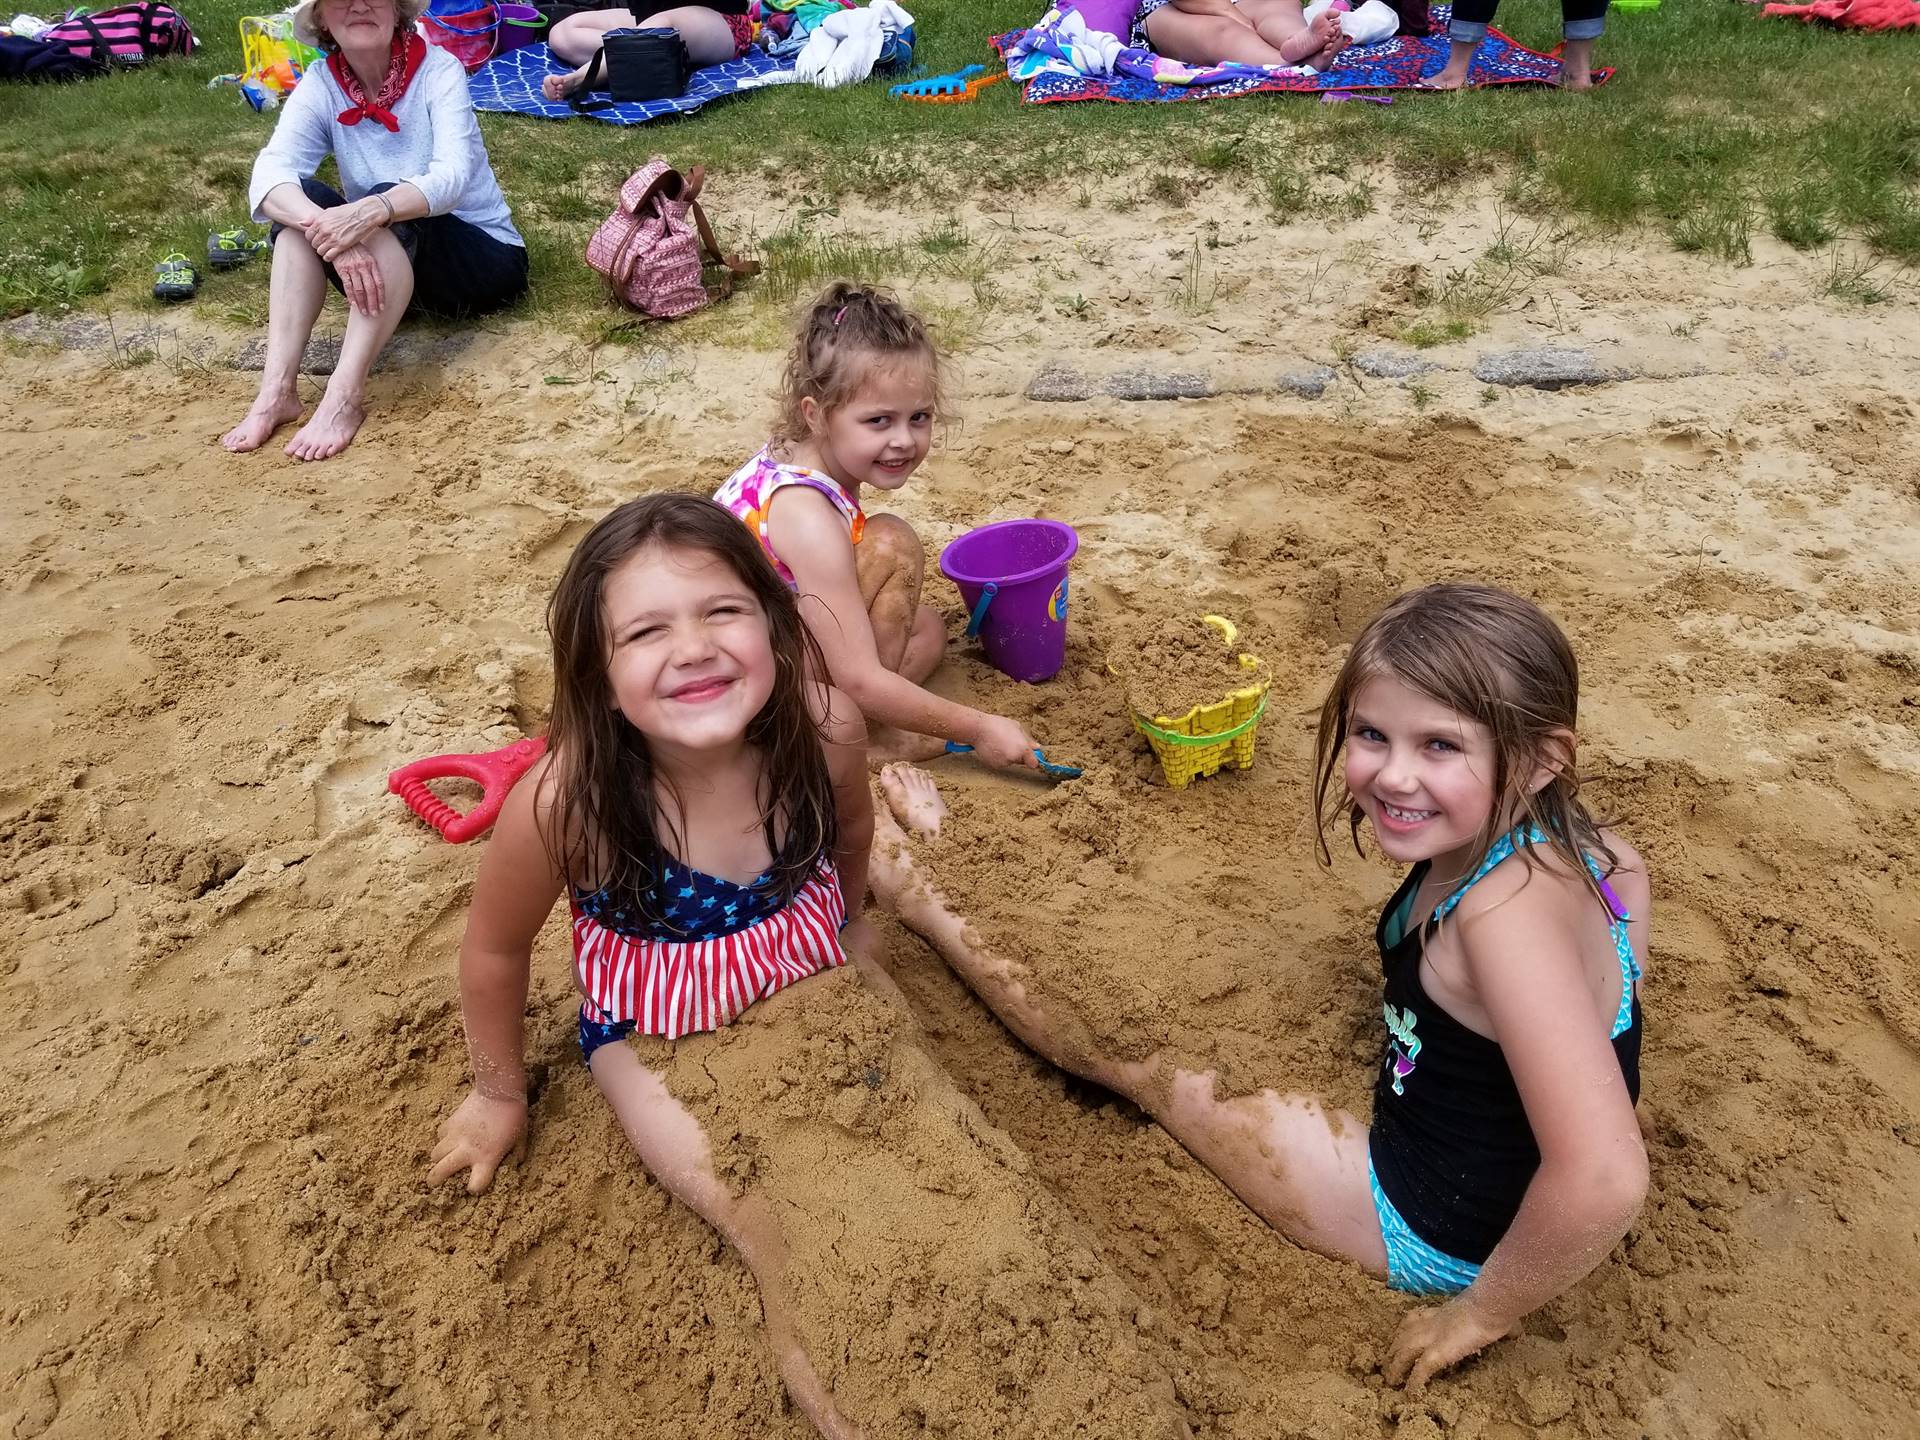 3 students create in the sand.